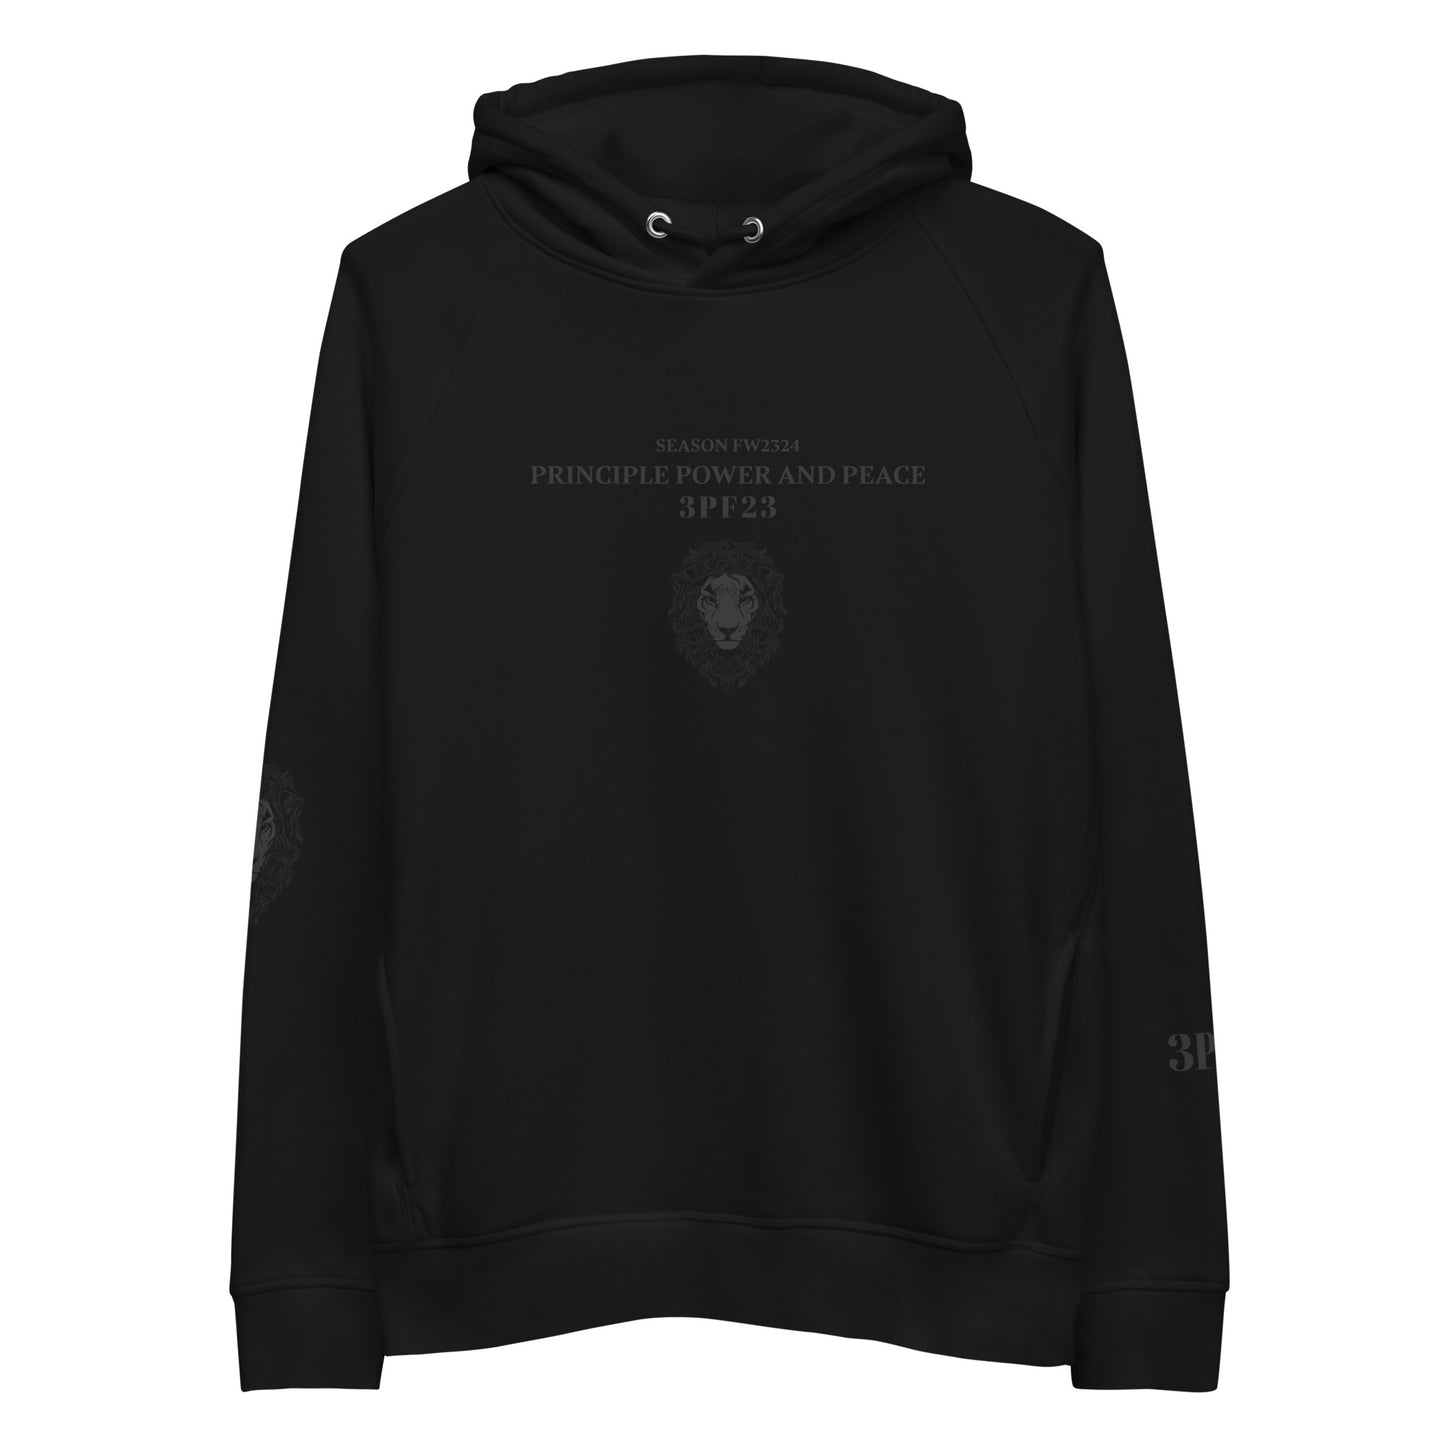 IN THE HEART OF LIONS UNISEX PULLOVER HOODIE